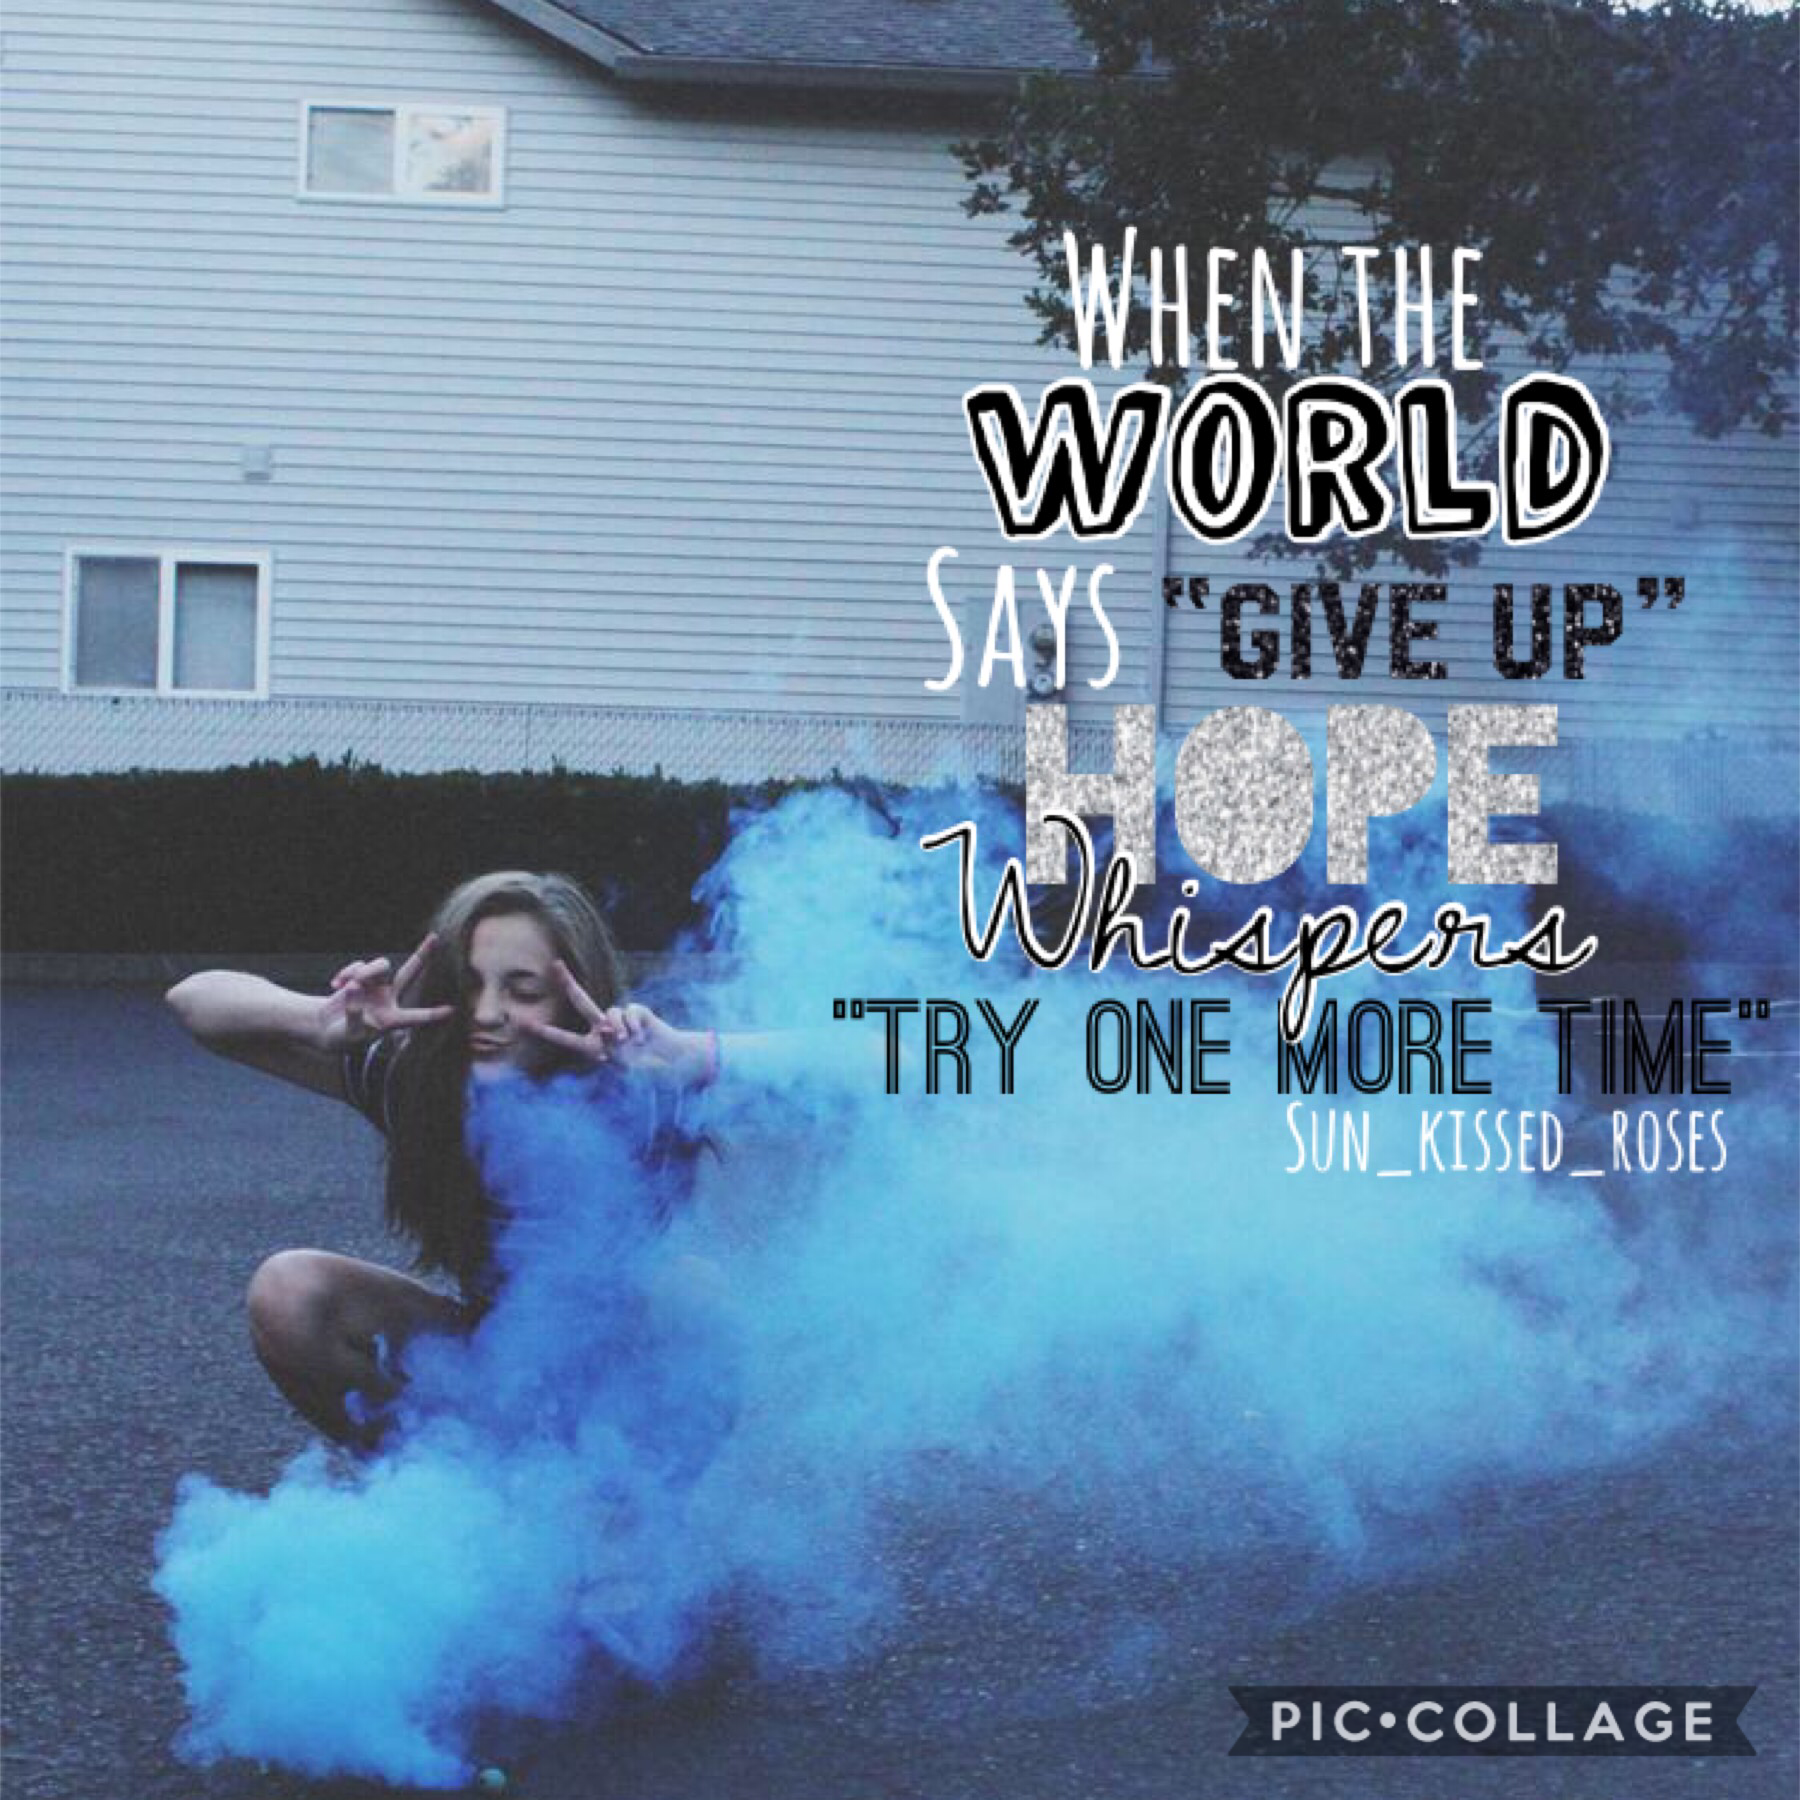 When the world says “give up”, hope whispers “try one more time” 